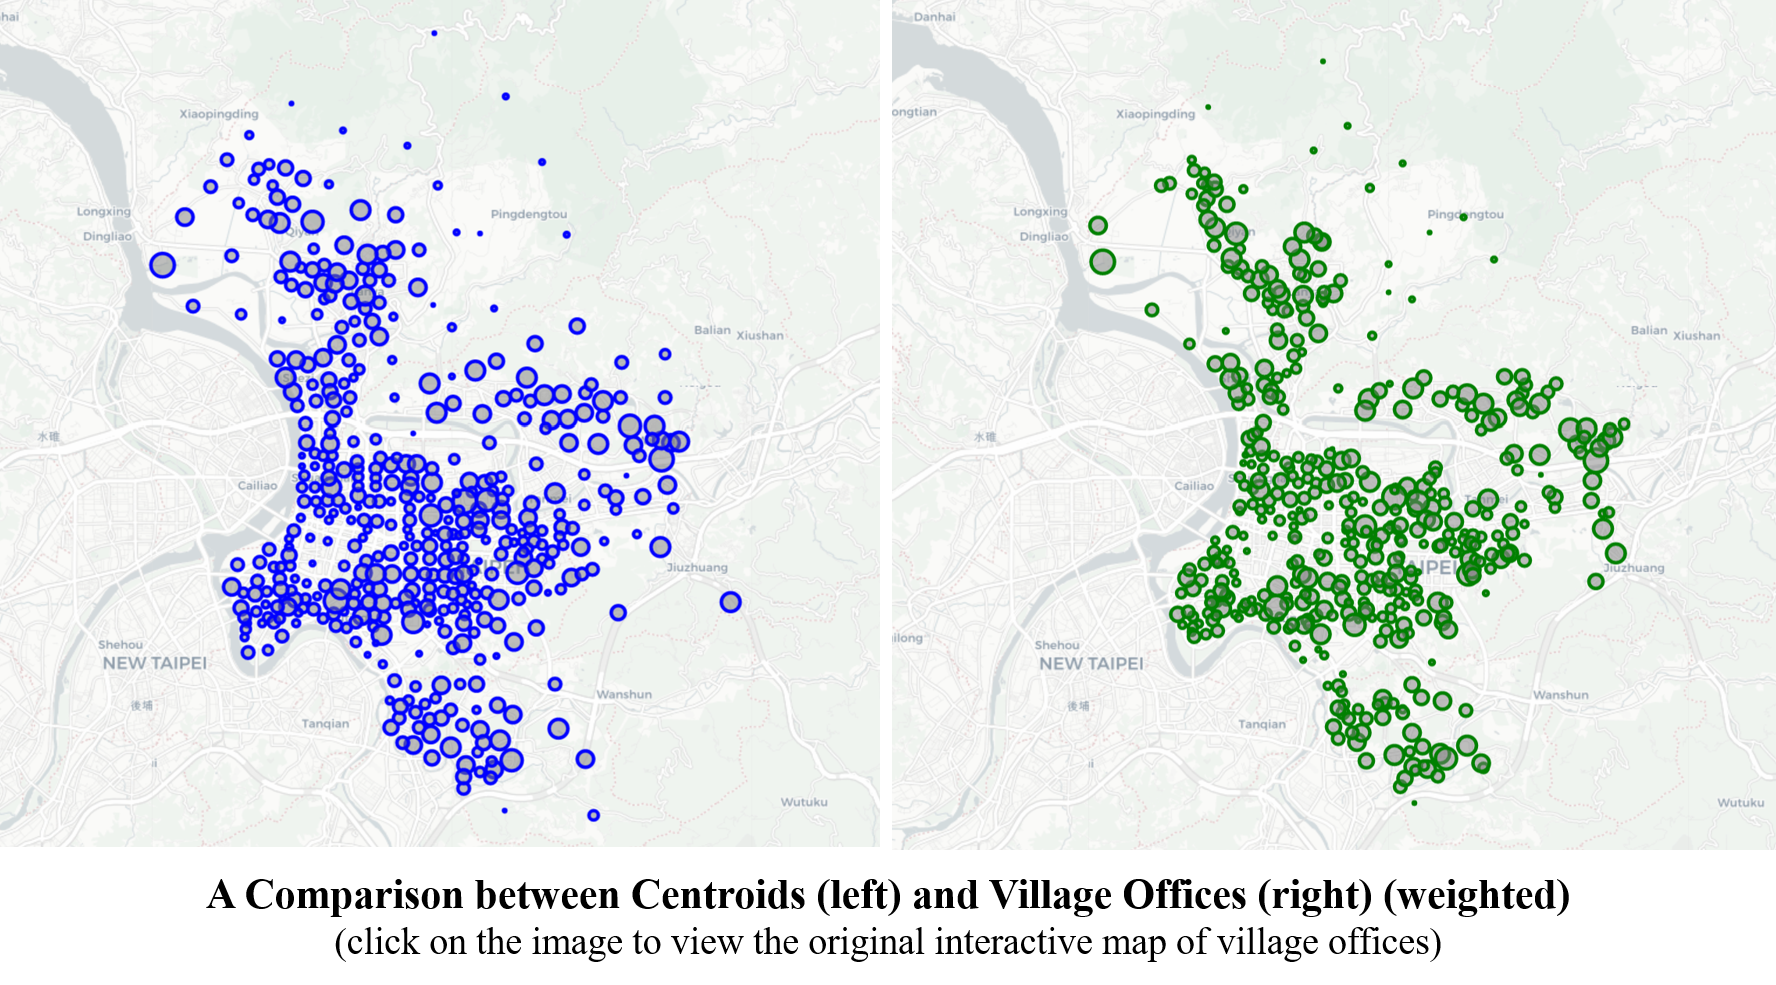 A_Comparison_between_Centroids_and_Village_Offices_weighted